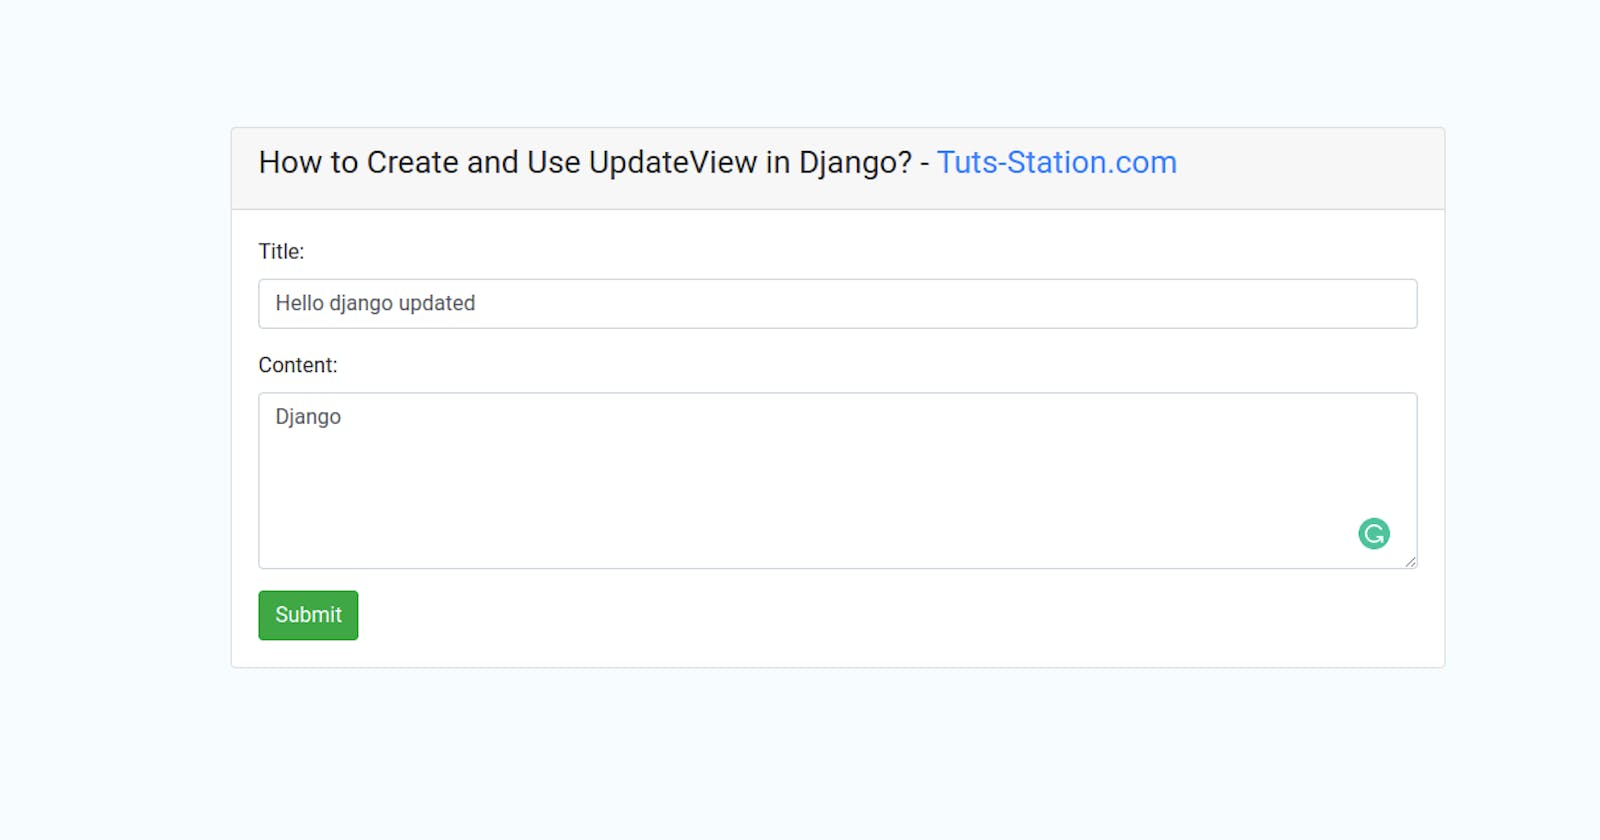 How to Use UpdateView in Django?